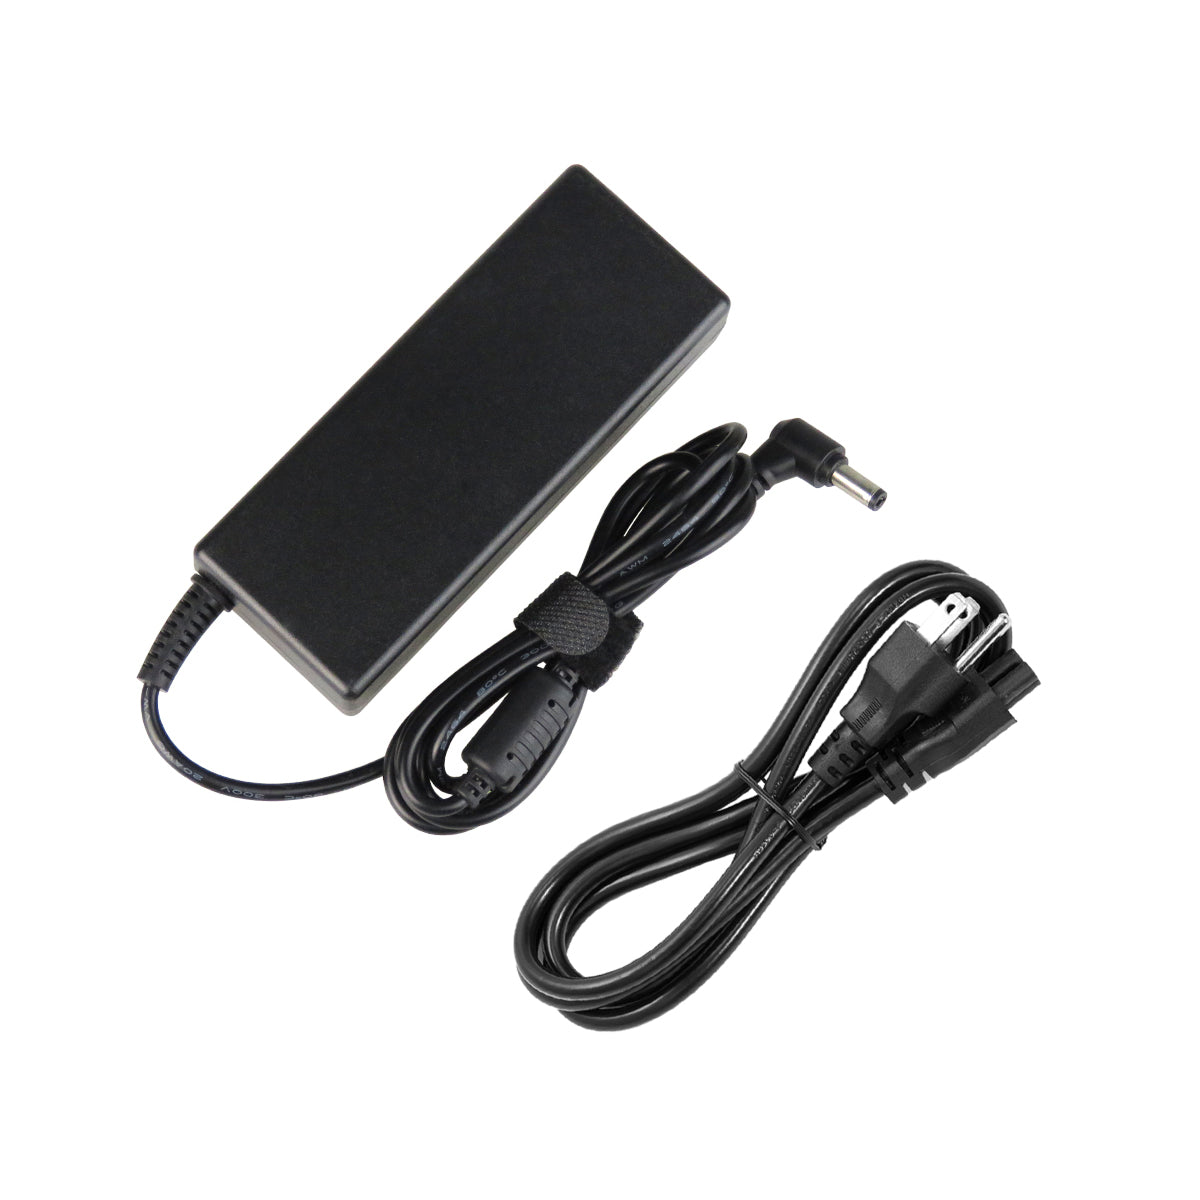 AC Adapter Charger for ASUS X50VL Notebook.